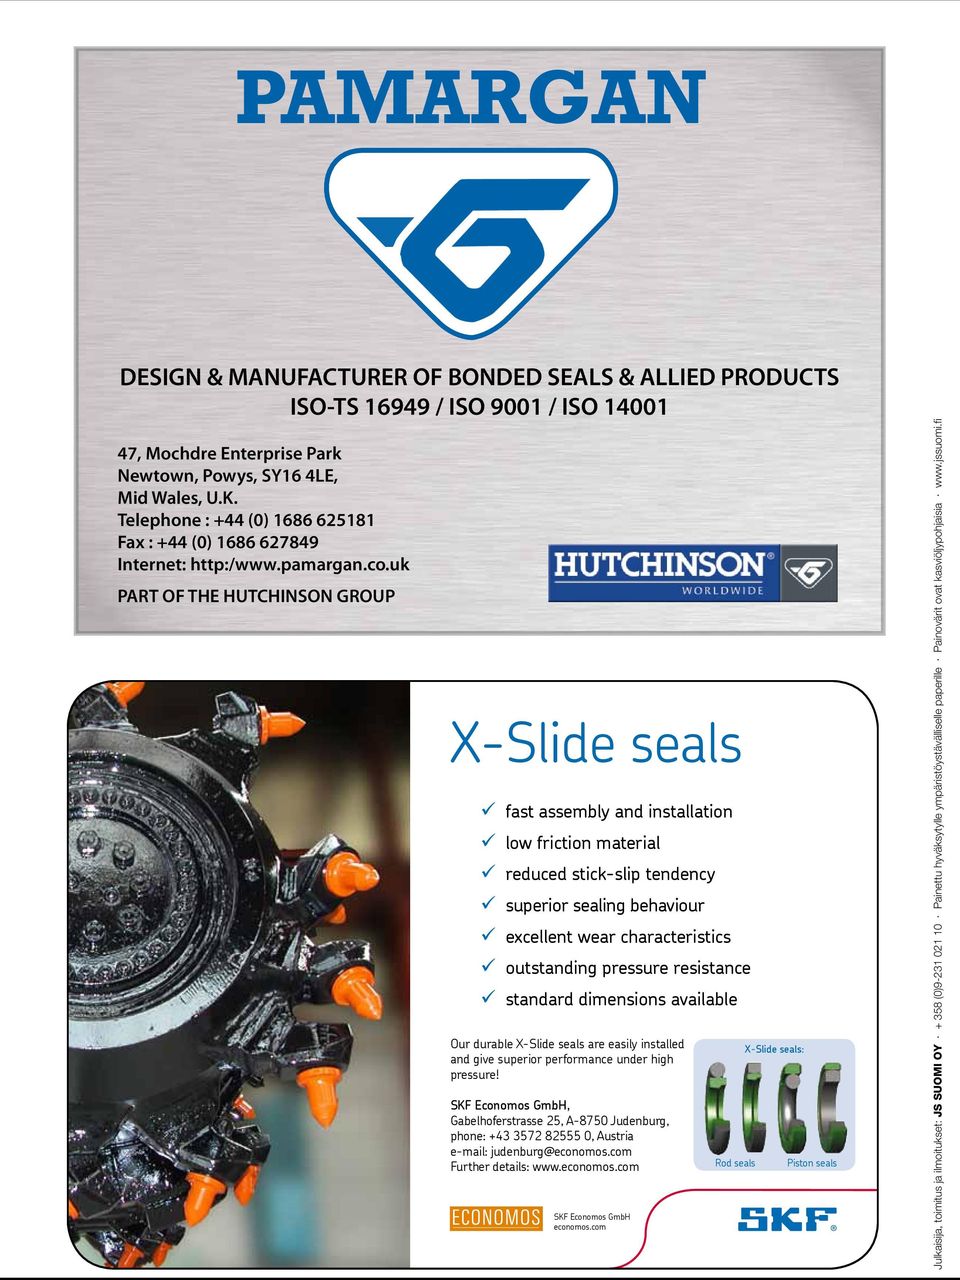 uk PART OF THE HUTCHINSON GROUP X-Slide seals ü fast assembly and installation ü low friction material ü reduced stick-slip tendency ü superior sealing behaviour ü excellent wear characteristics ü